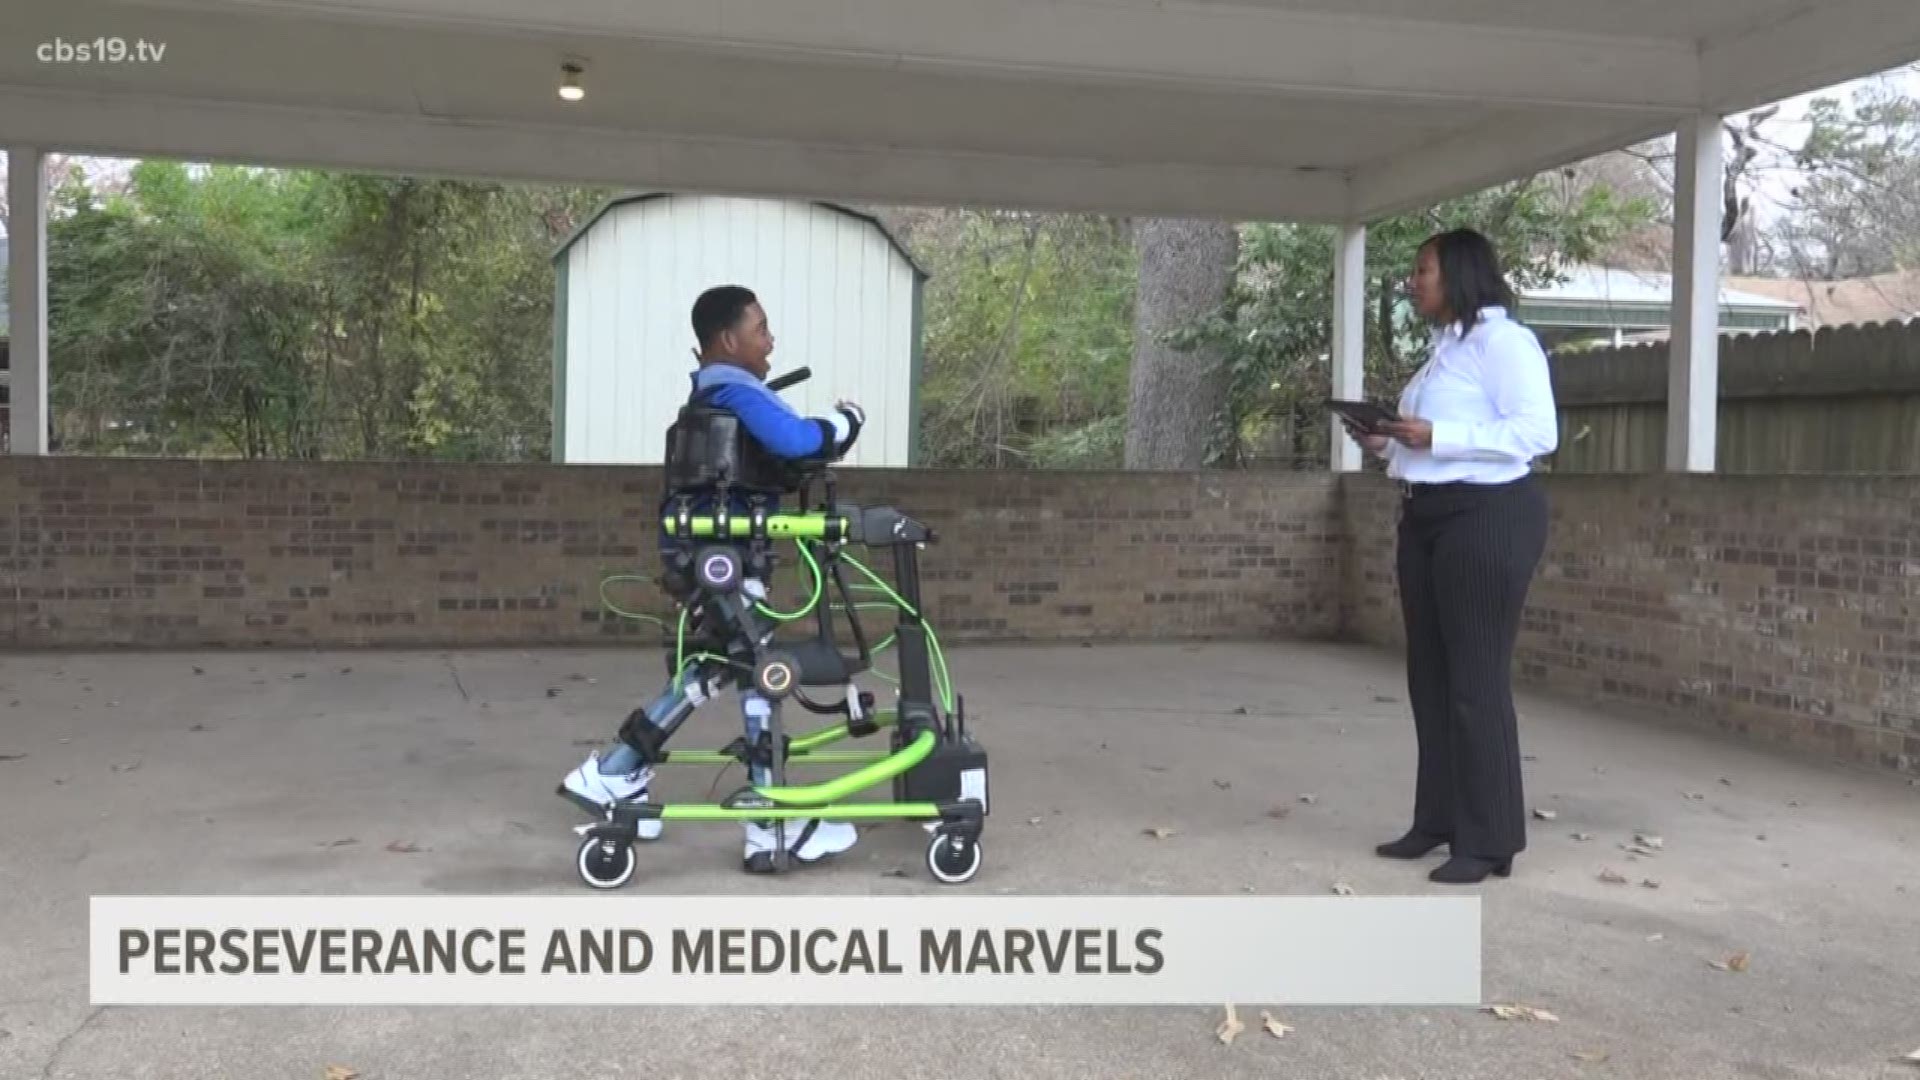 DeJai Mitchell has been confined to a wheelchair his whole life, but now he is learning to walk using a robotic assistant.